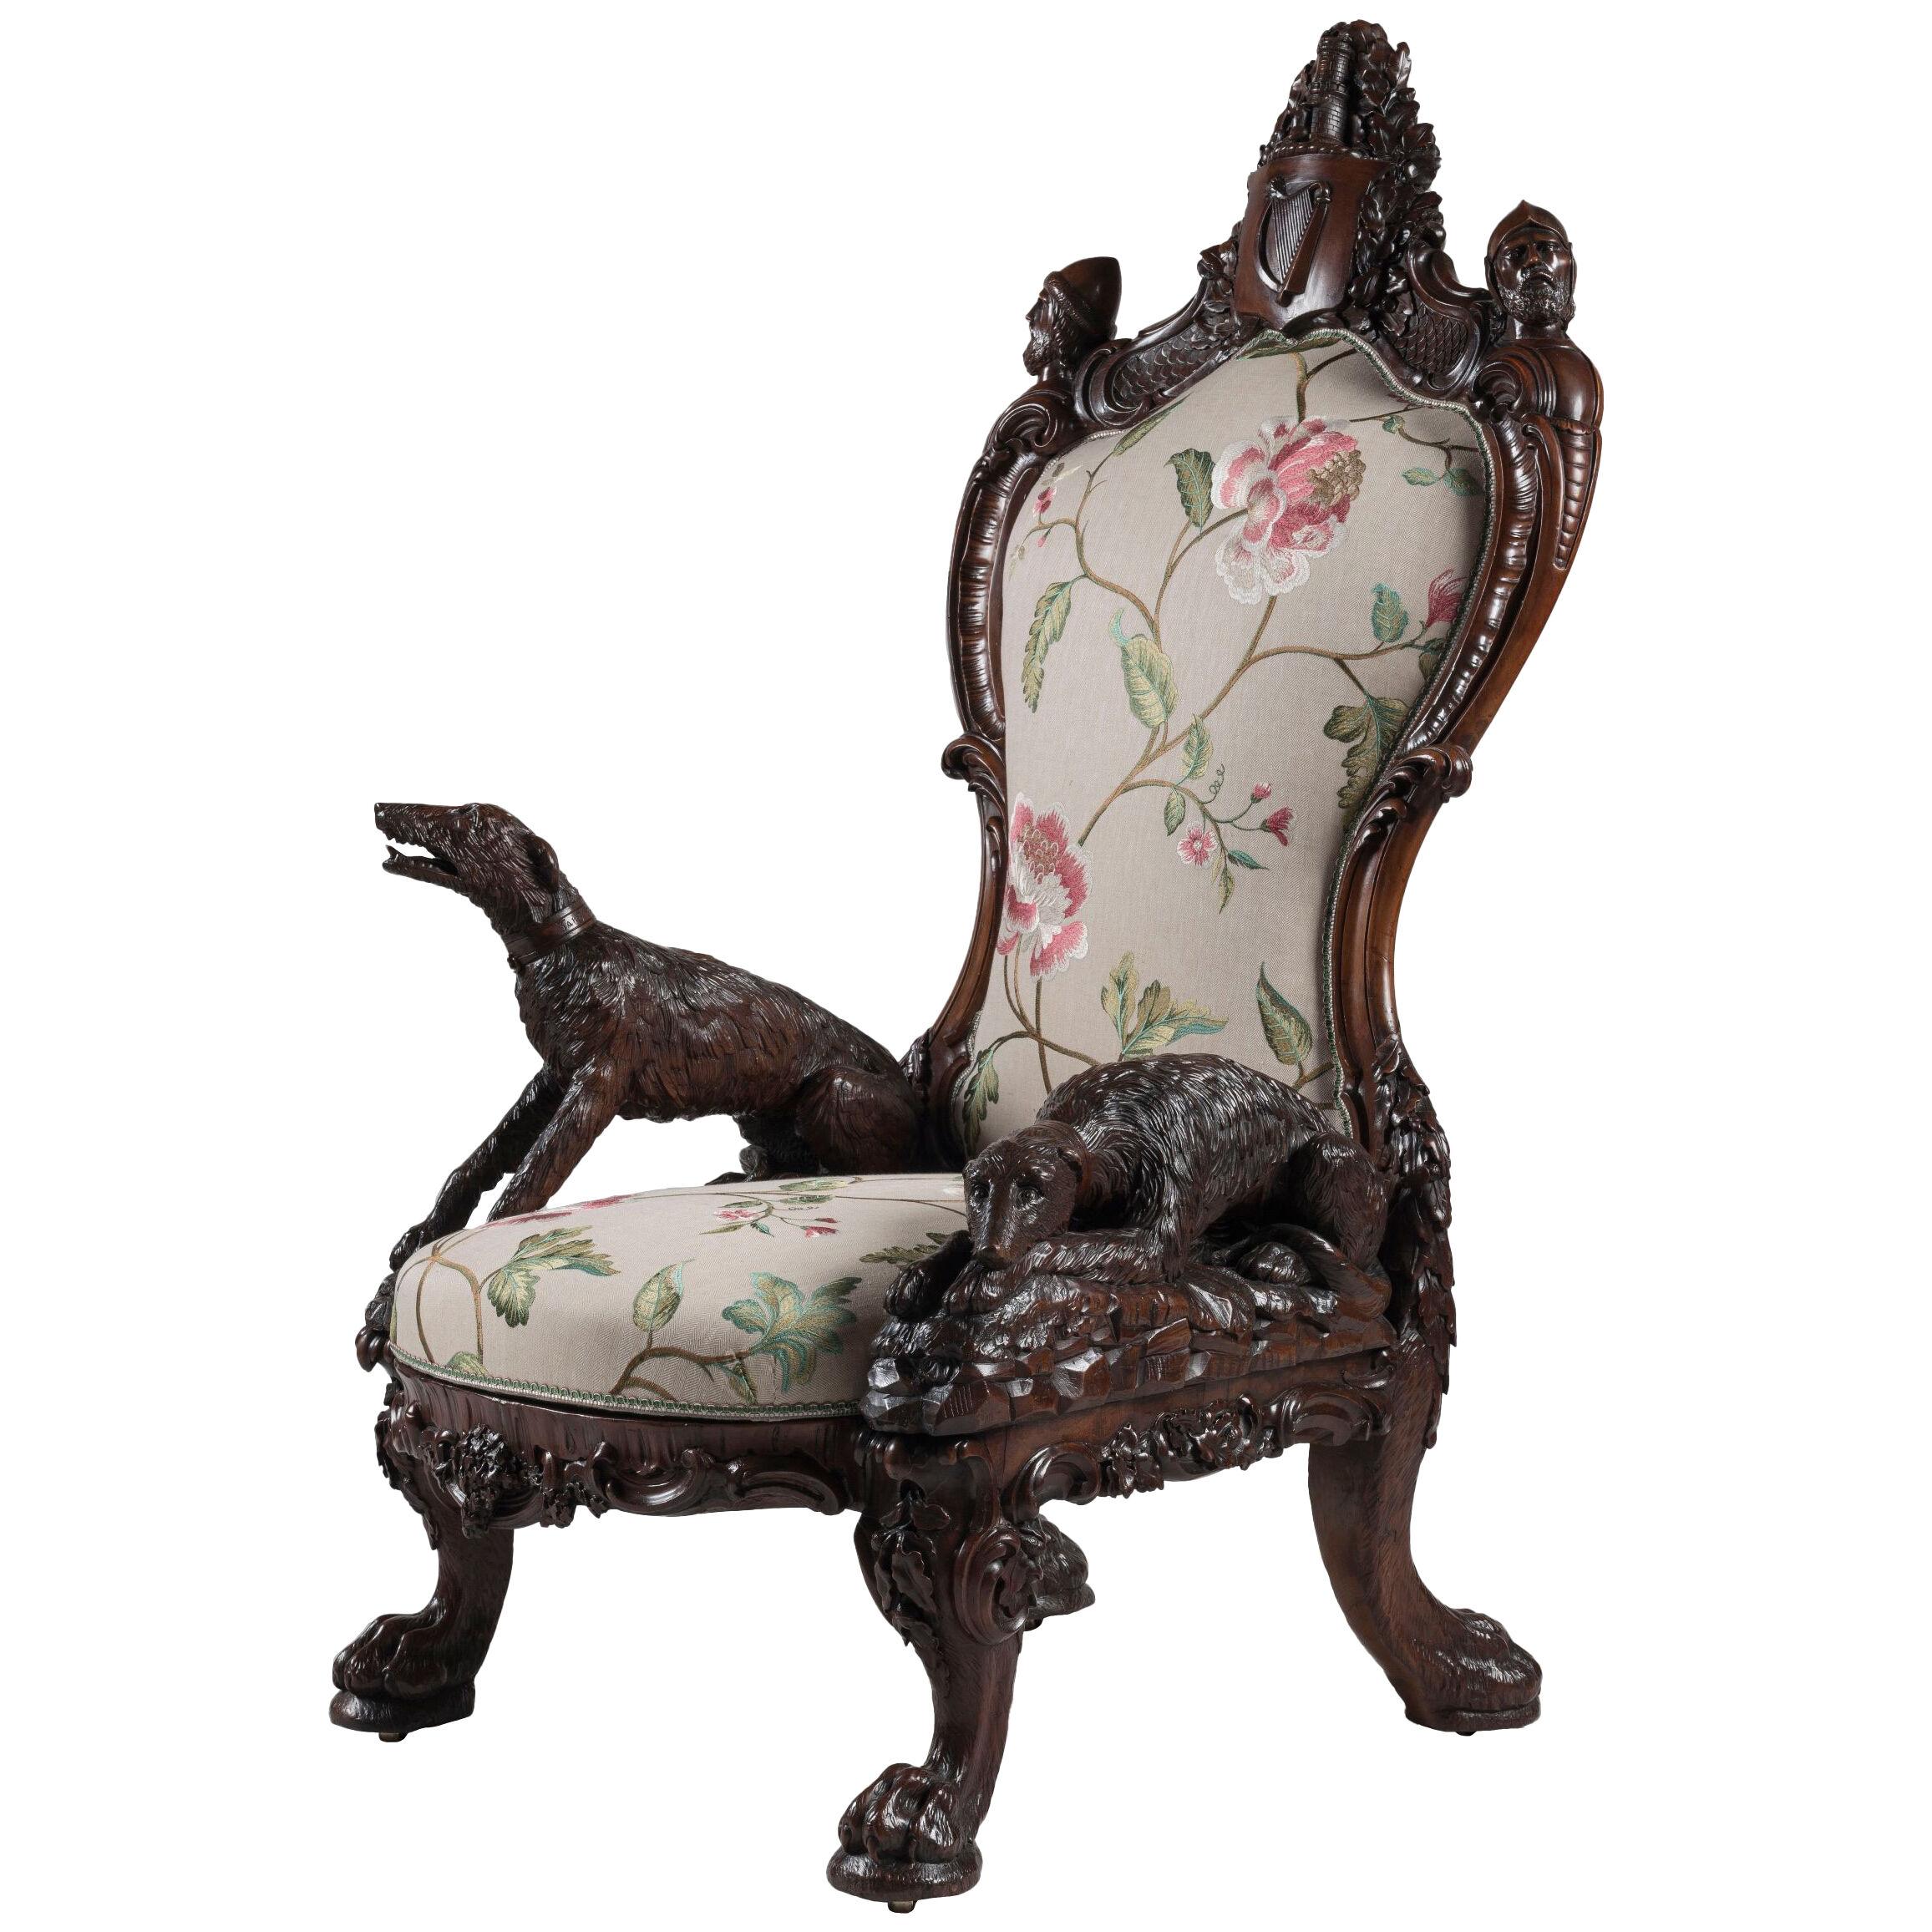 The 1851 Great Exhibition Carved Bog Yew Armchair